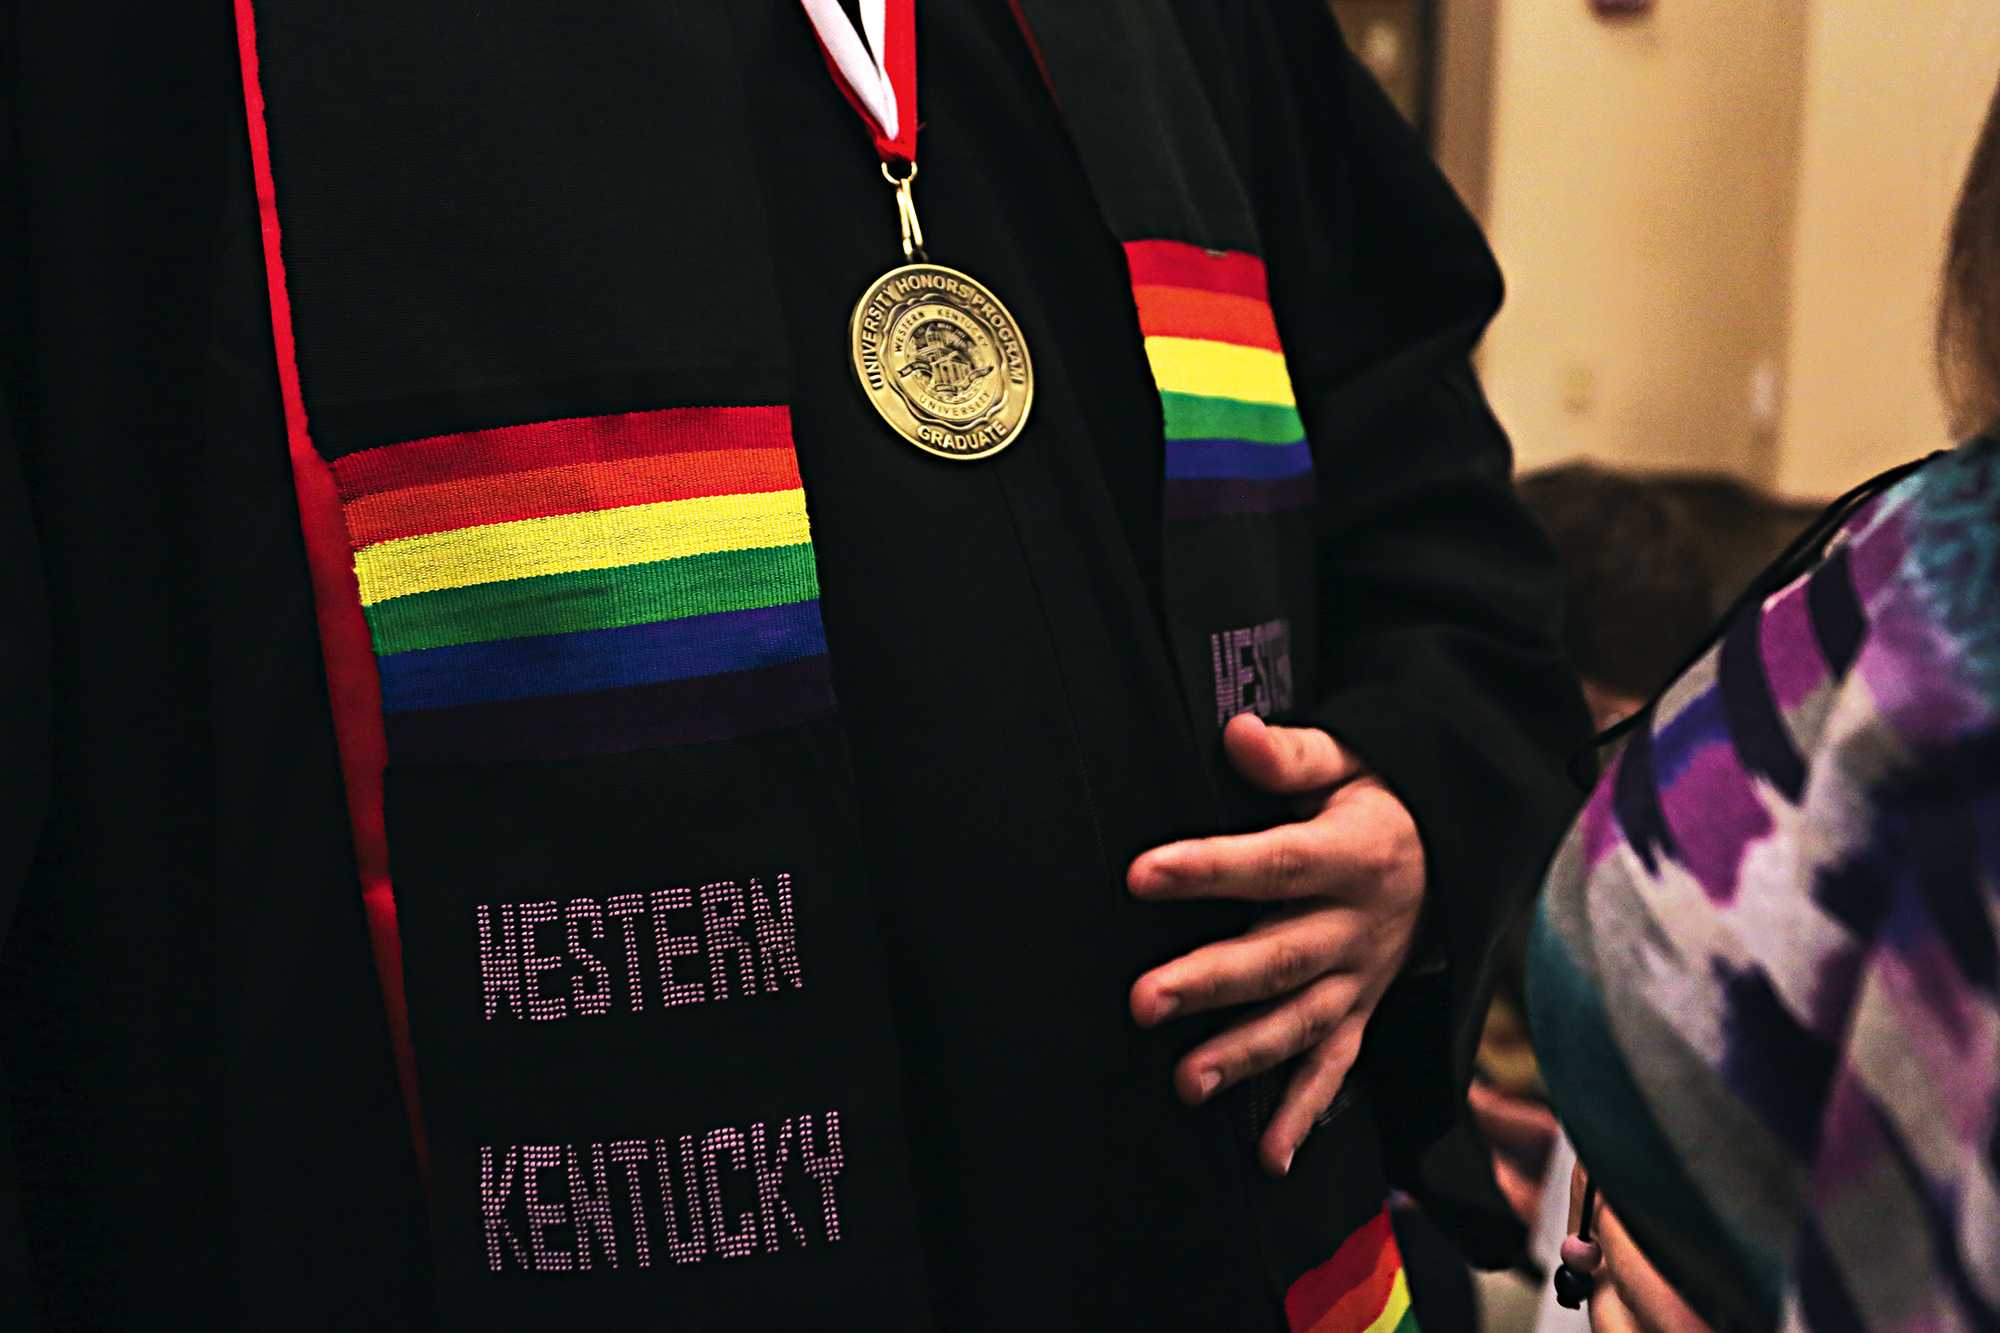 Church wears his new stole after the lavender graduation ceremony at the Augenstein Alumni Center on May 11. Each lavender graduate was given a rainbow stole during the ceremony to represent equality.